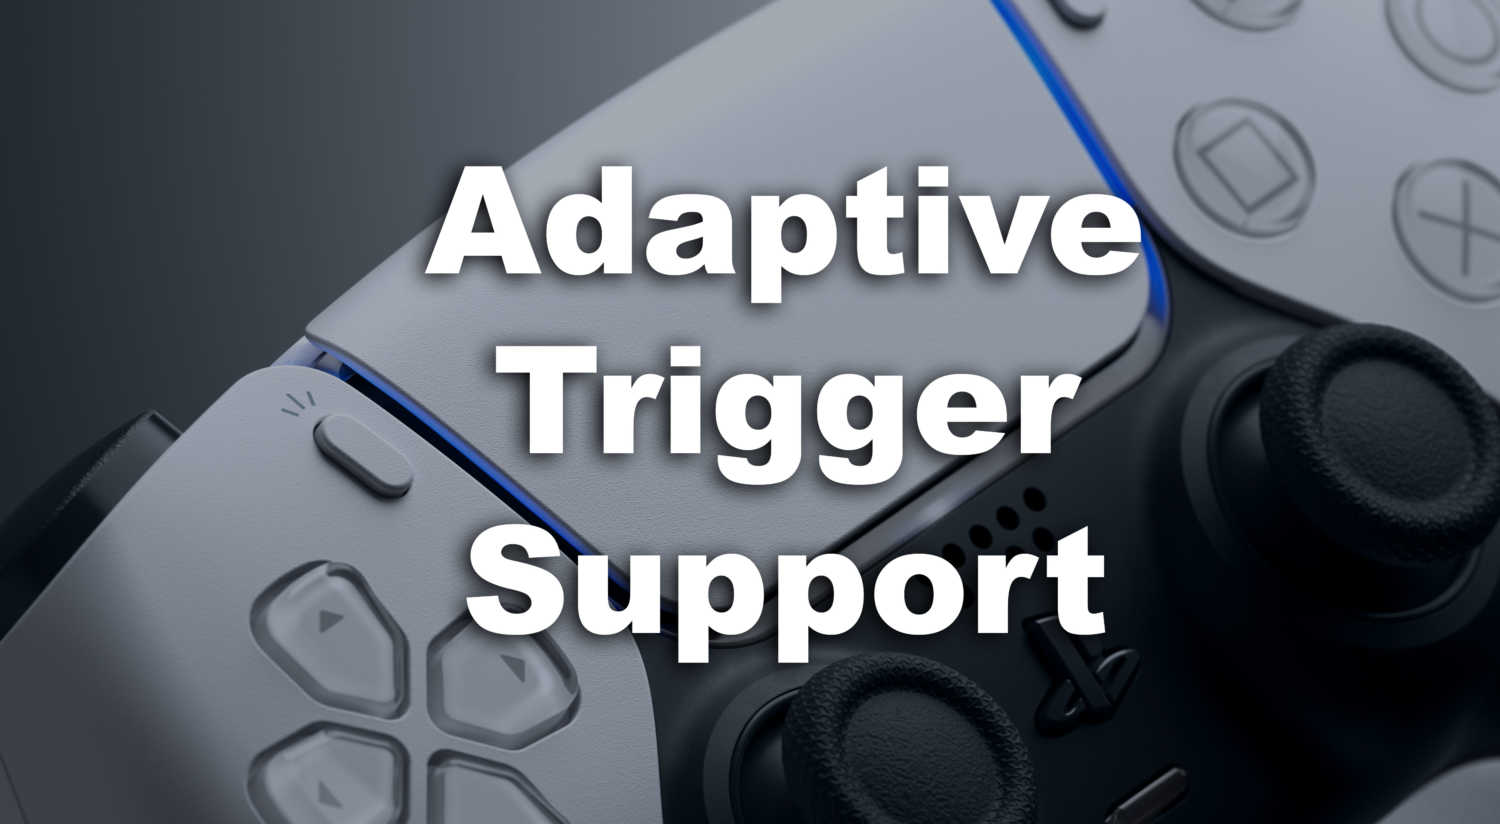 ps5 games with adaptive trigger